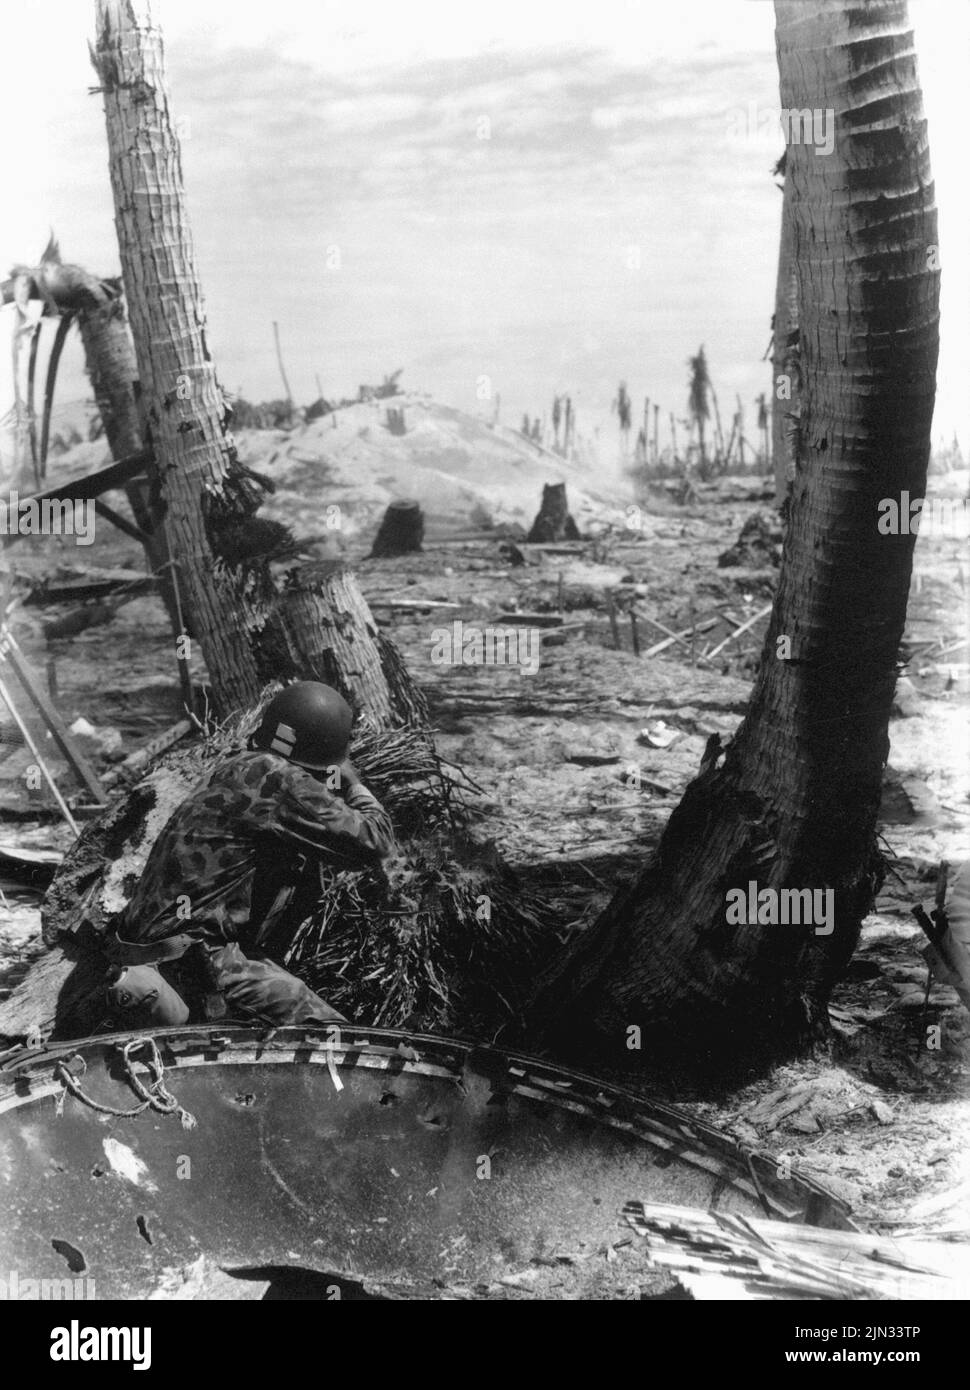 A US Marine firing on a Japanese pillbox from behind a blasted tree during the Battle of Tarawa. The landings on Tarawa were part of the US offensive against the Pacific Islands held by Japan before preparing for an assault on the Japanese mainland. Stock Photo